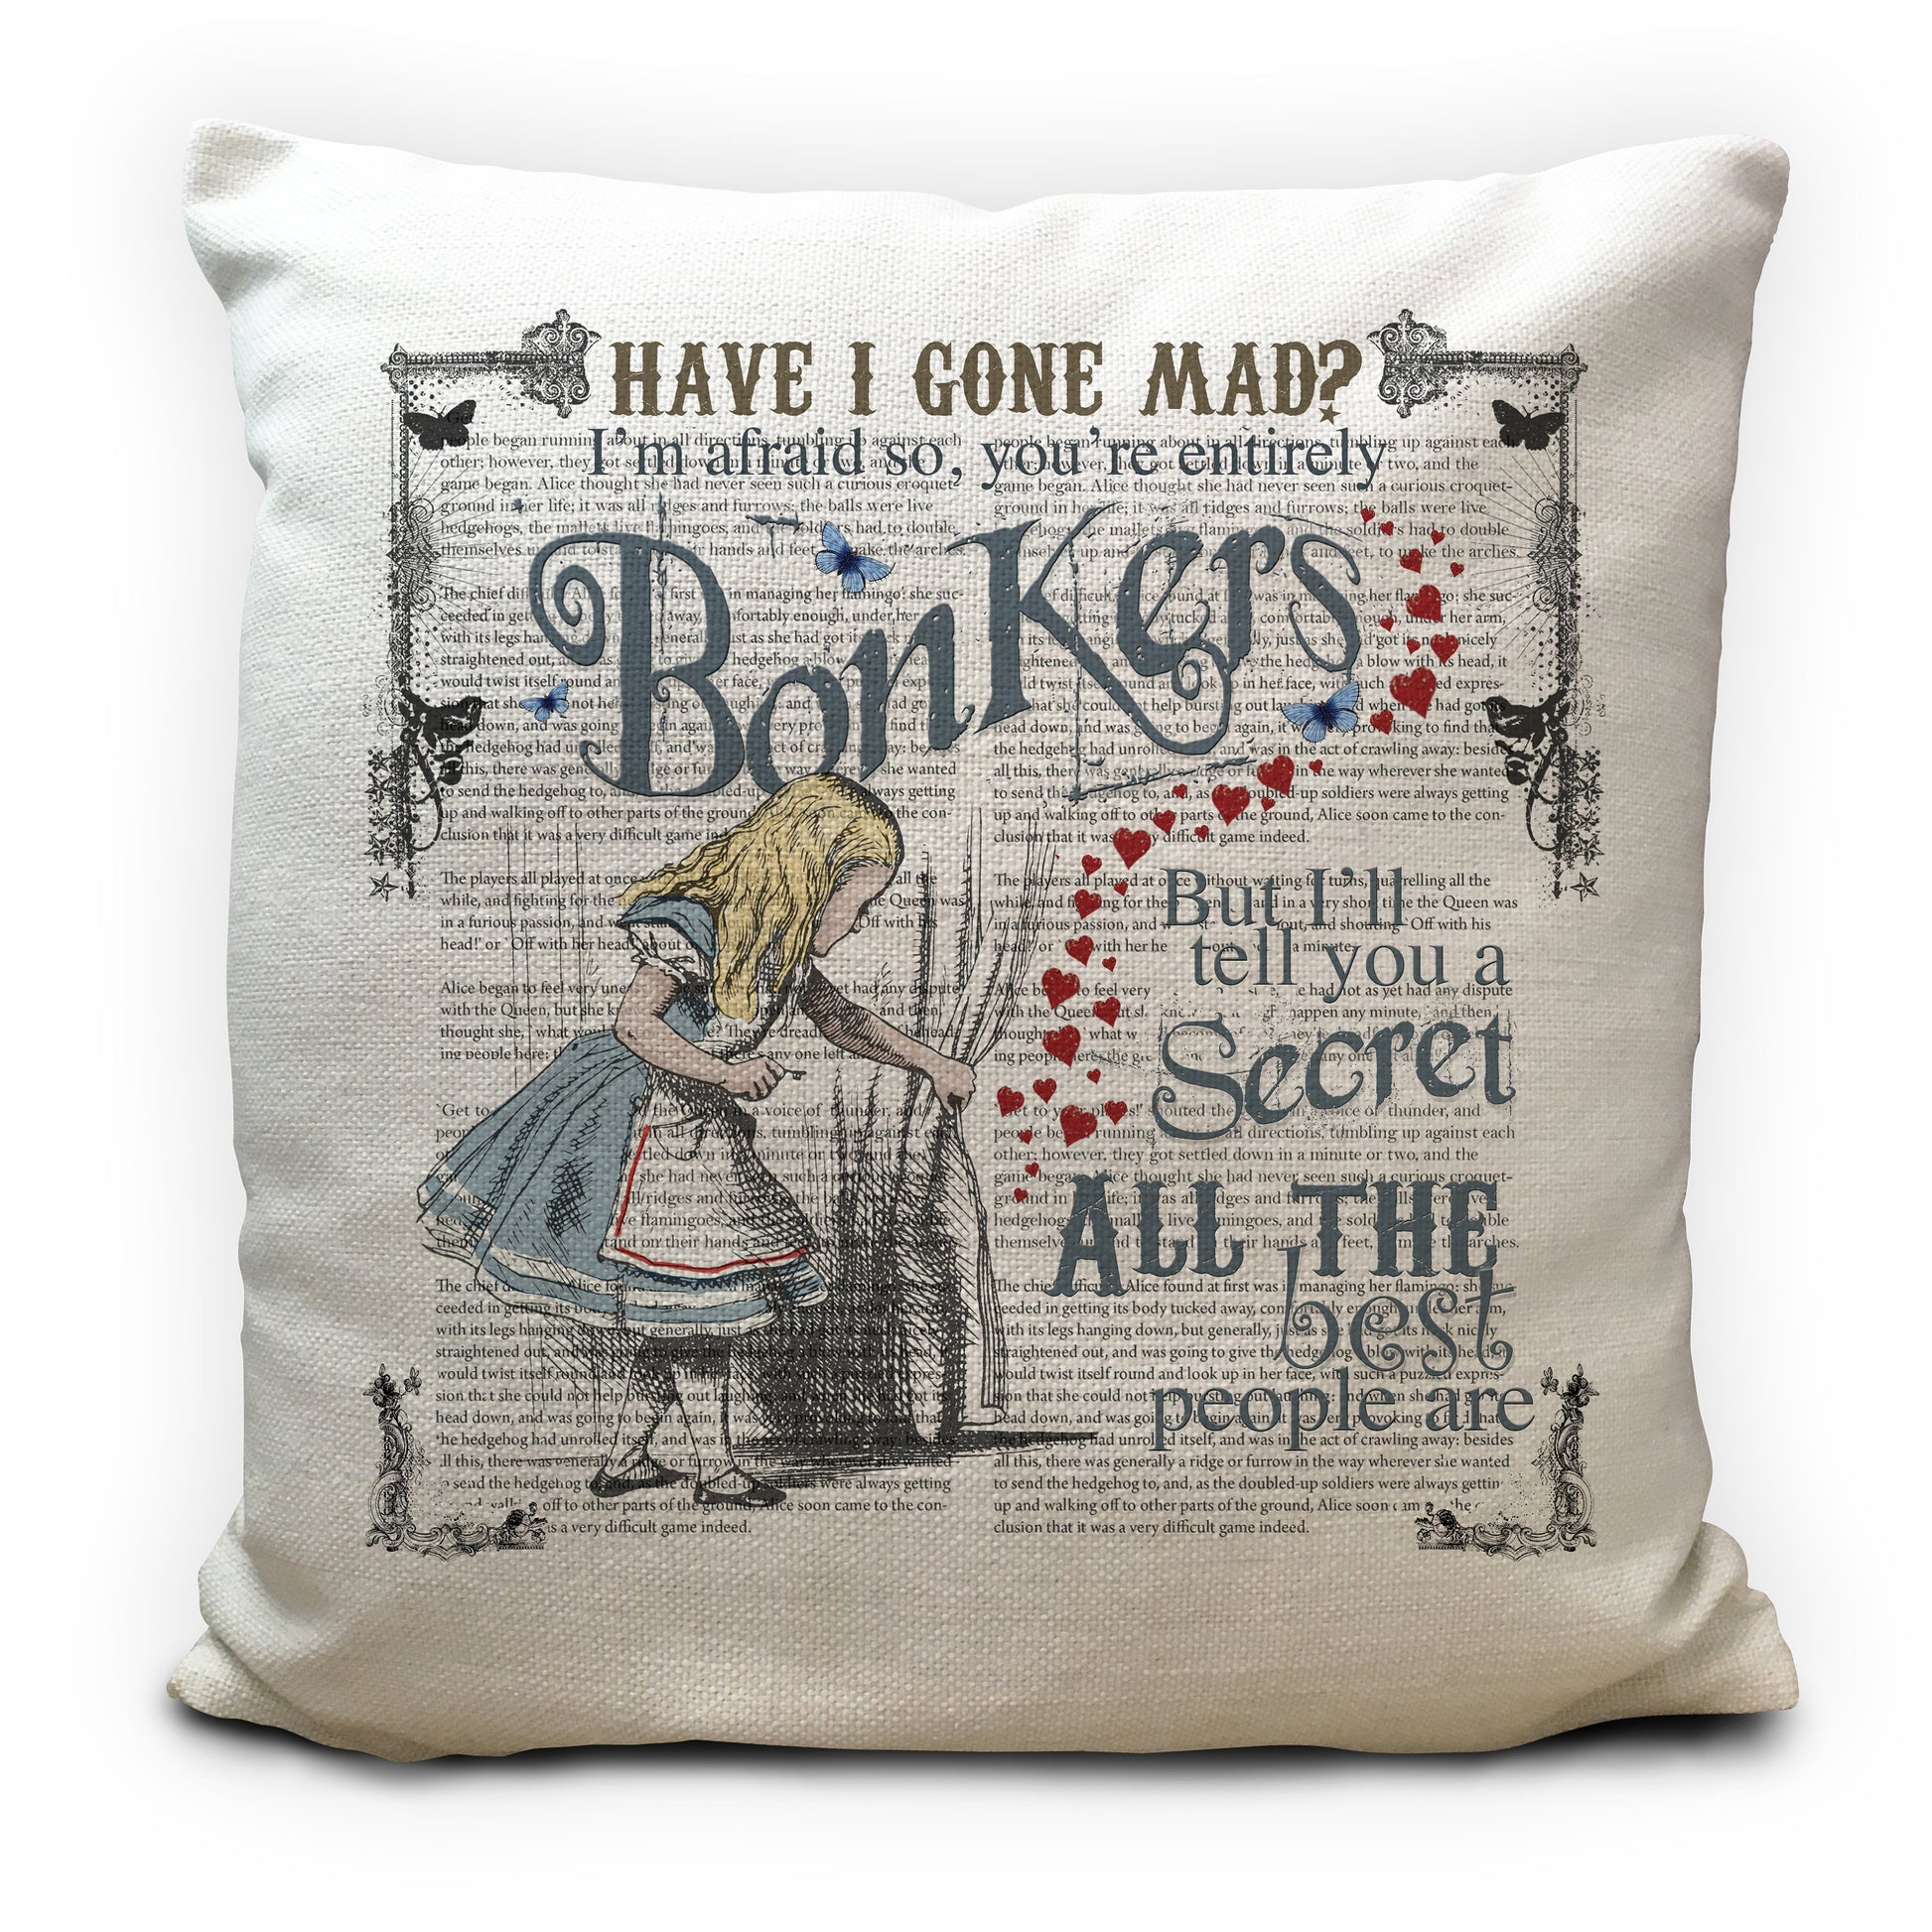 Alice in wonderland cushion cover with Alice drawing curtain